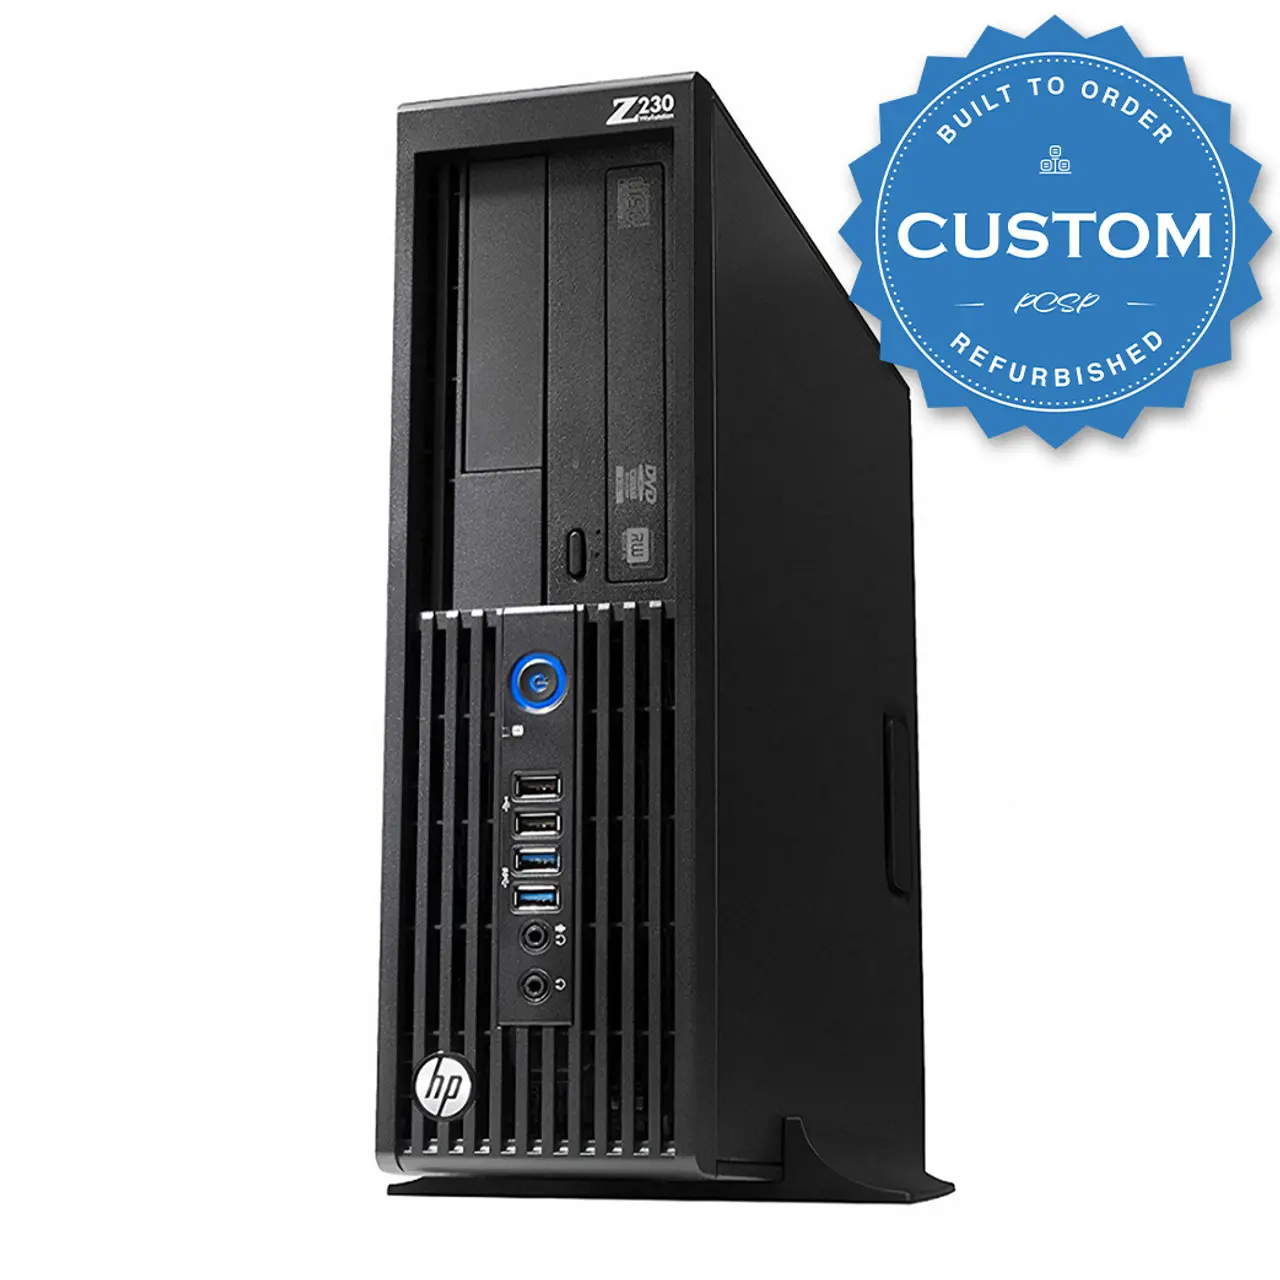 hewlett-packard hp z230 sff workstation release date - What processors are supported by HP Z230